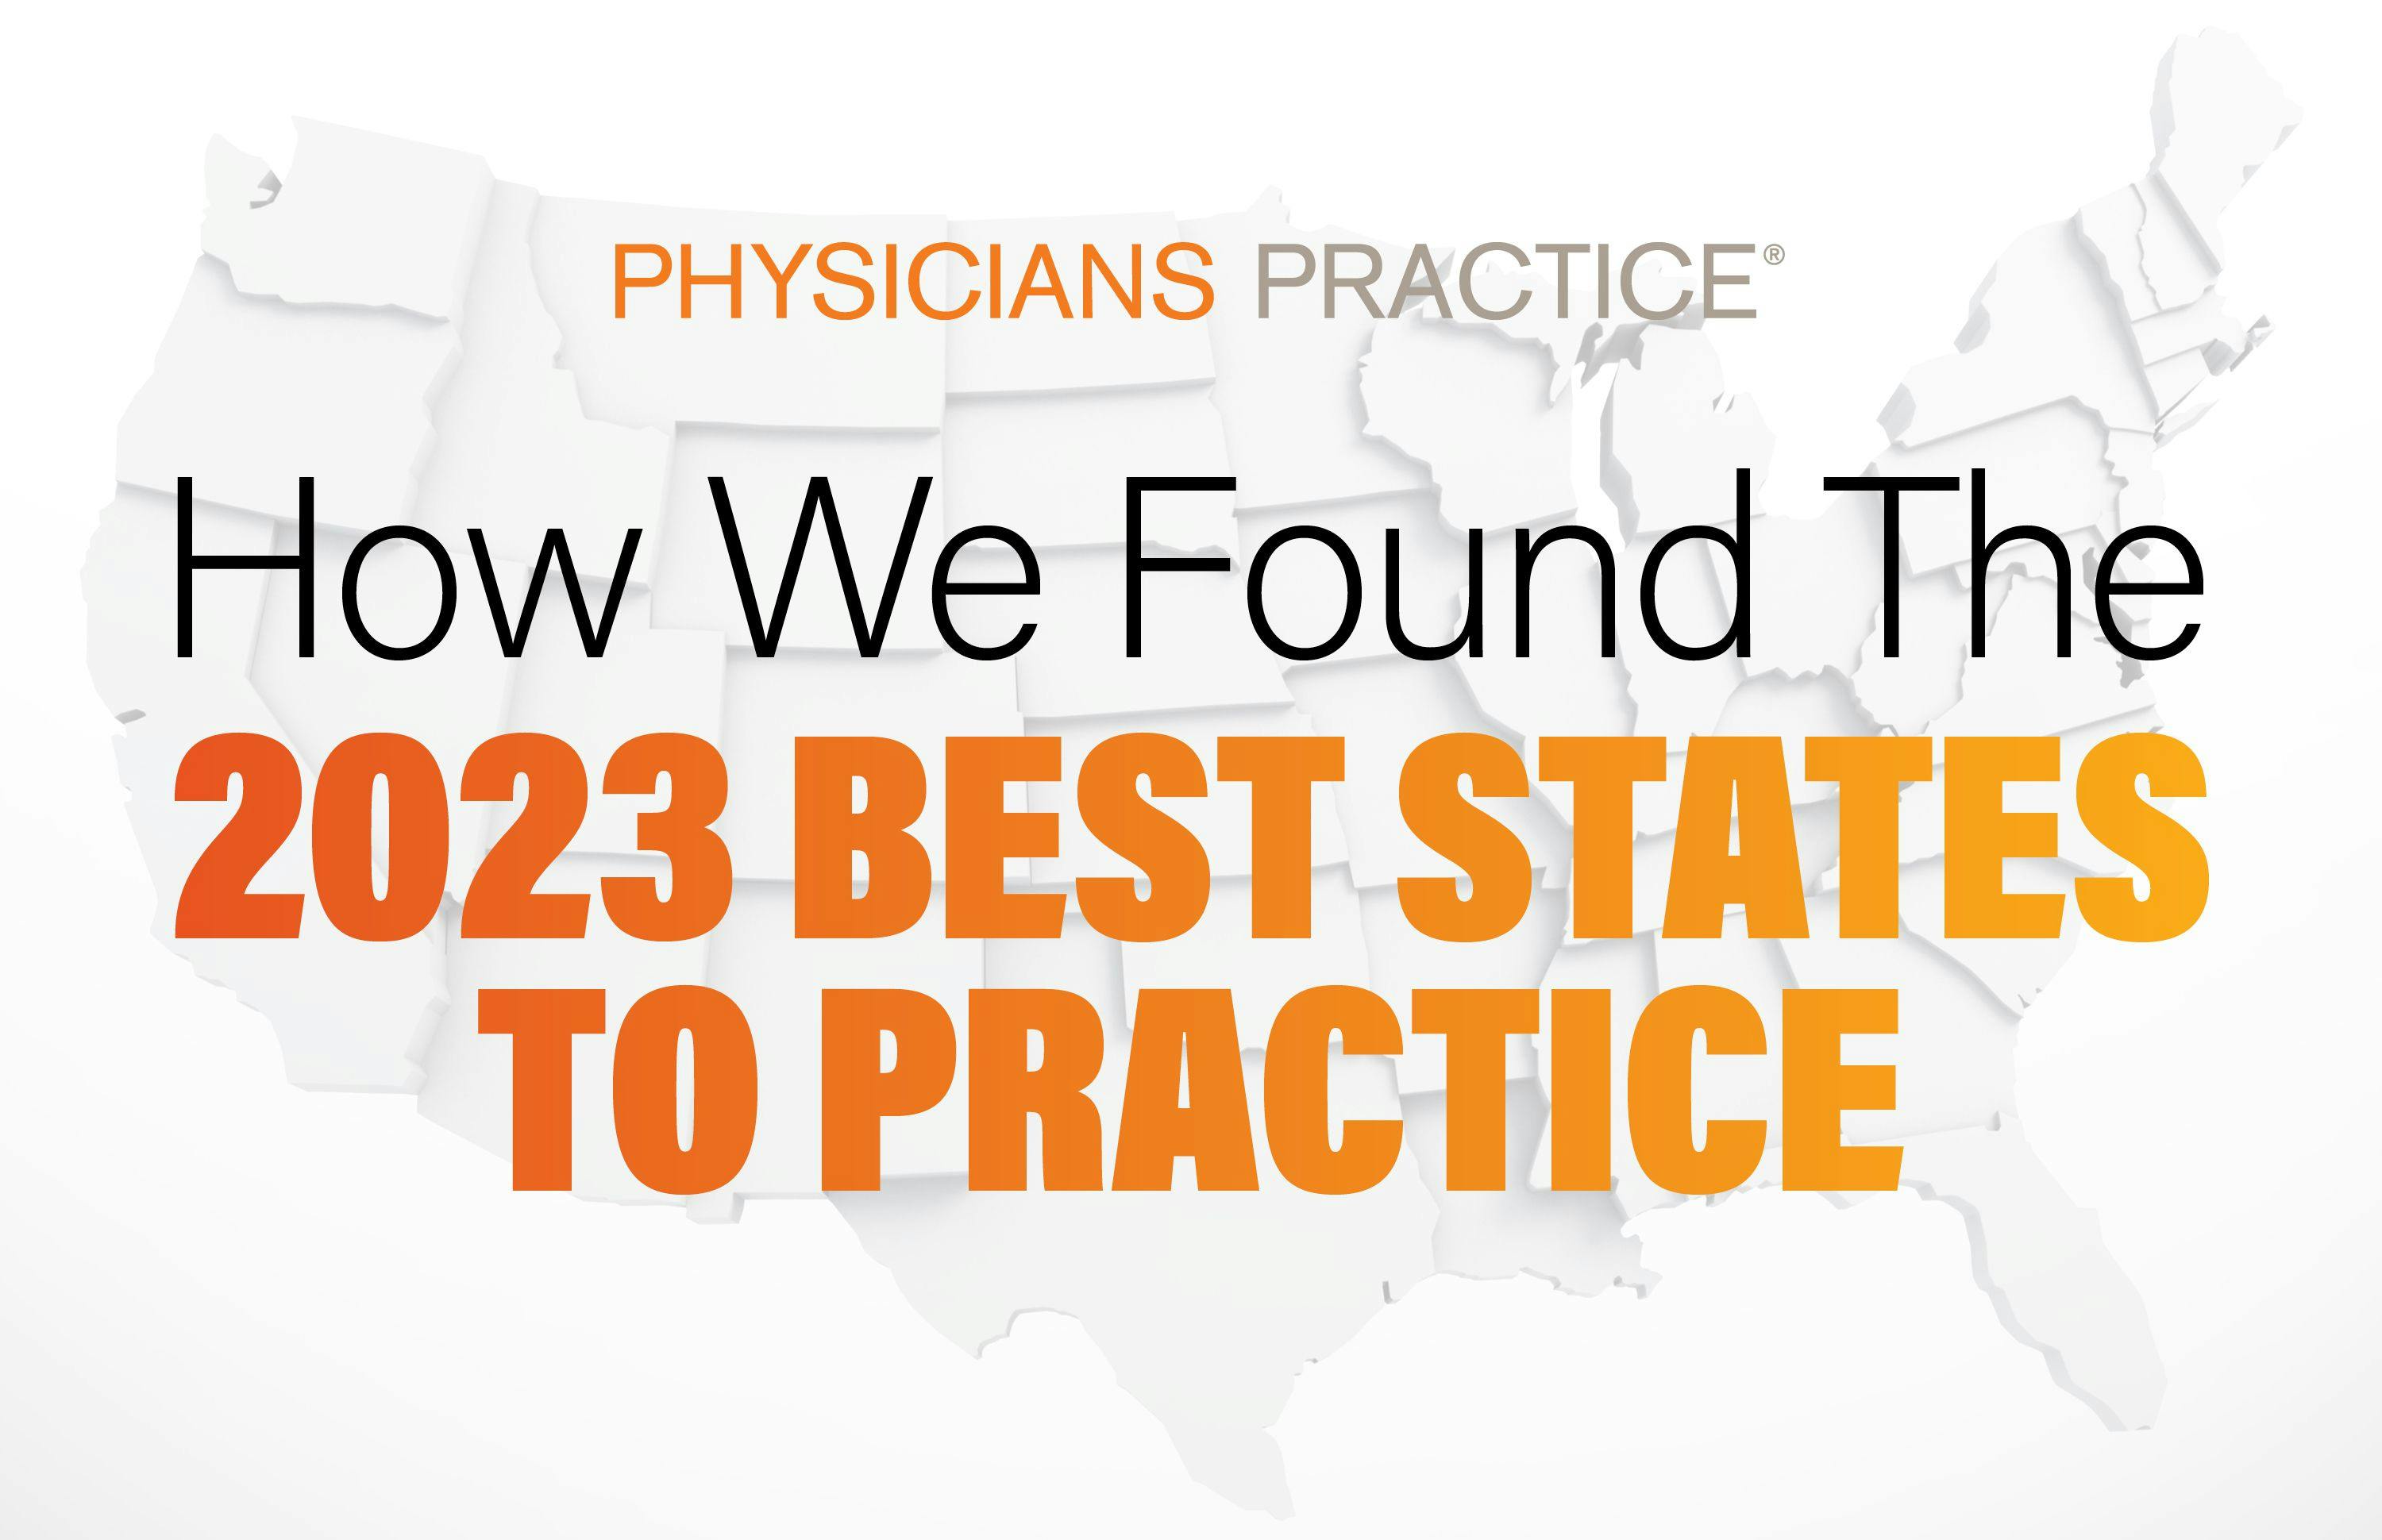 How we found the 2023 Best States to Practice